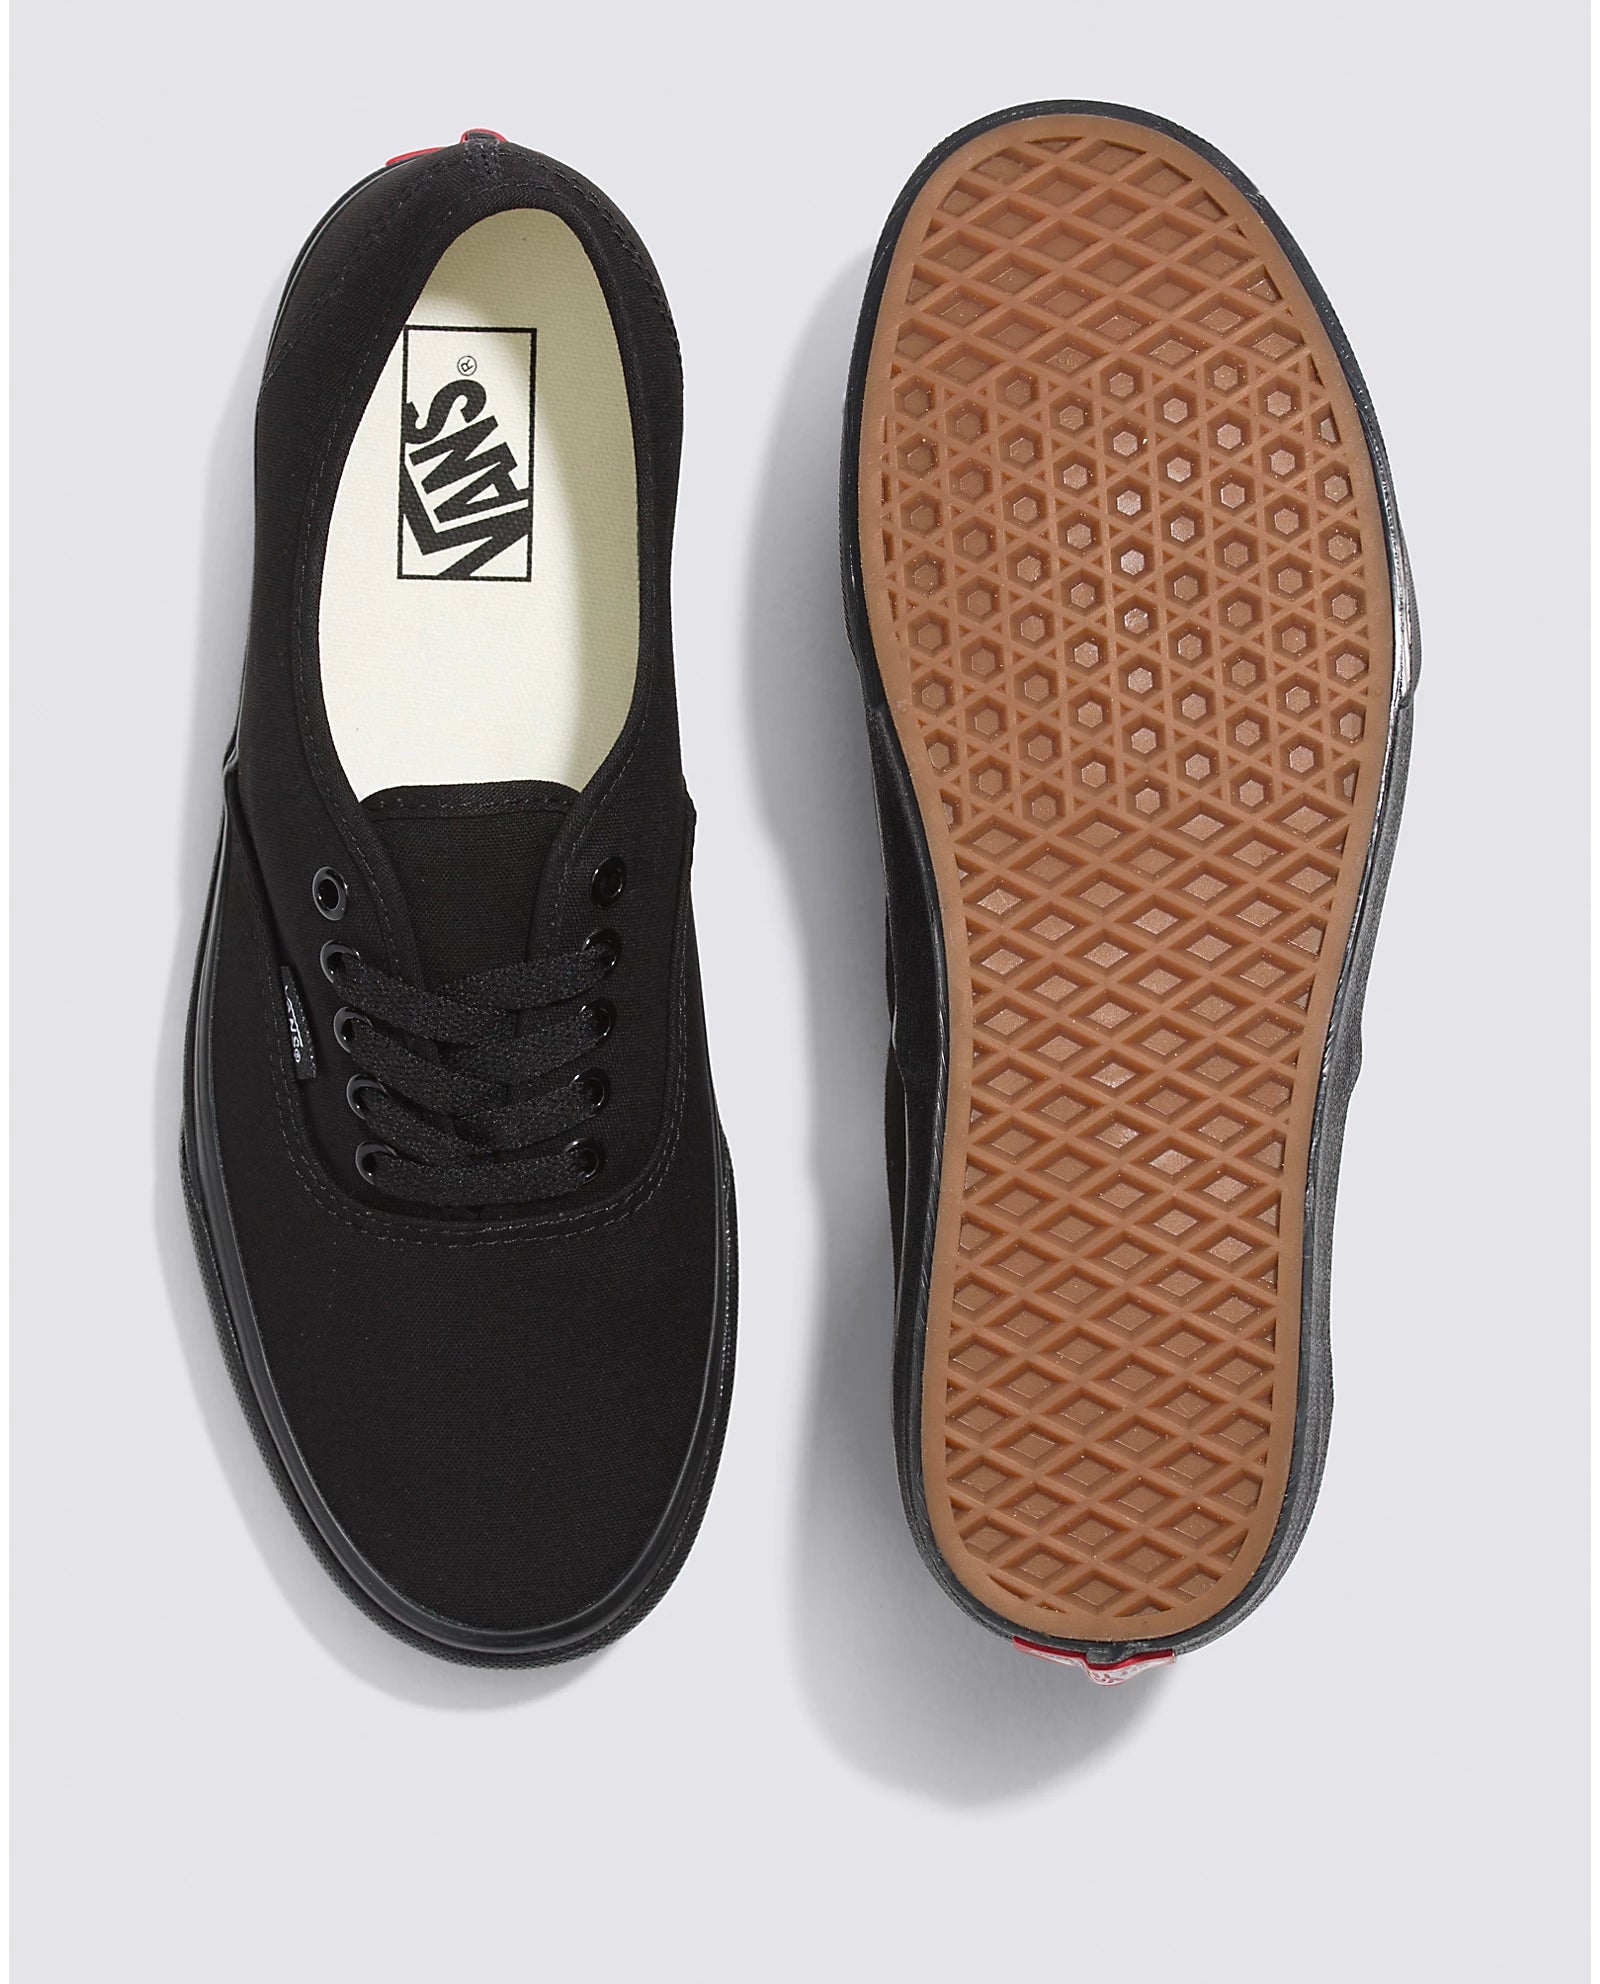 Vans - Authentic Anaheim Flame Sneakers - Adult Collection - - Black |  Smallable